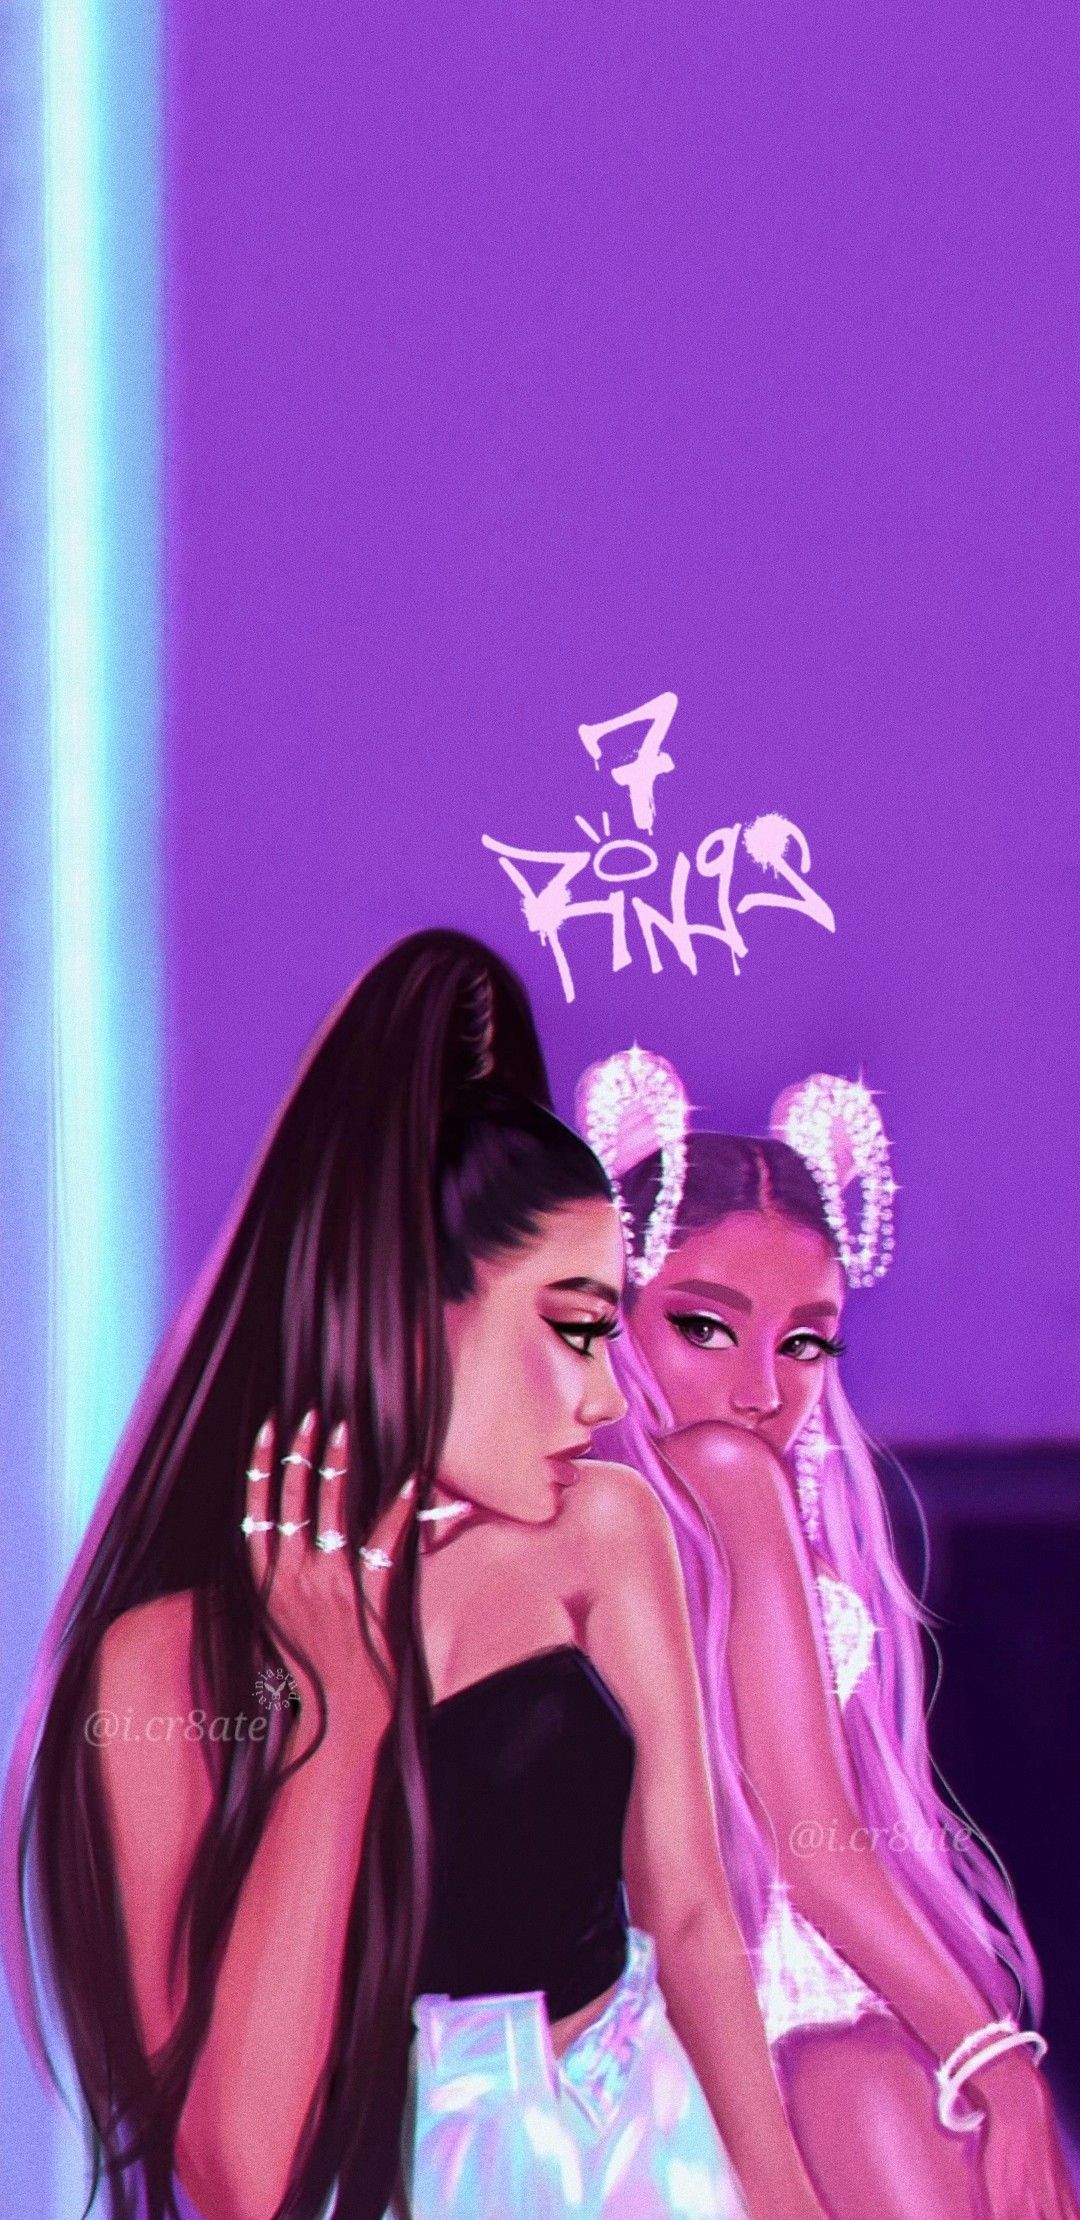 Free download ariana grande wallpaper 7 rings artist icr8ate on ig [1080x2220] for your Desktop, Mobile & Tablet. Explore Ariana 7 Rings Wallpaper. Wallpaper Lord Of The Rings, Lord